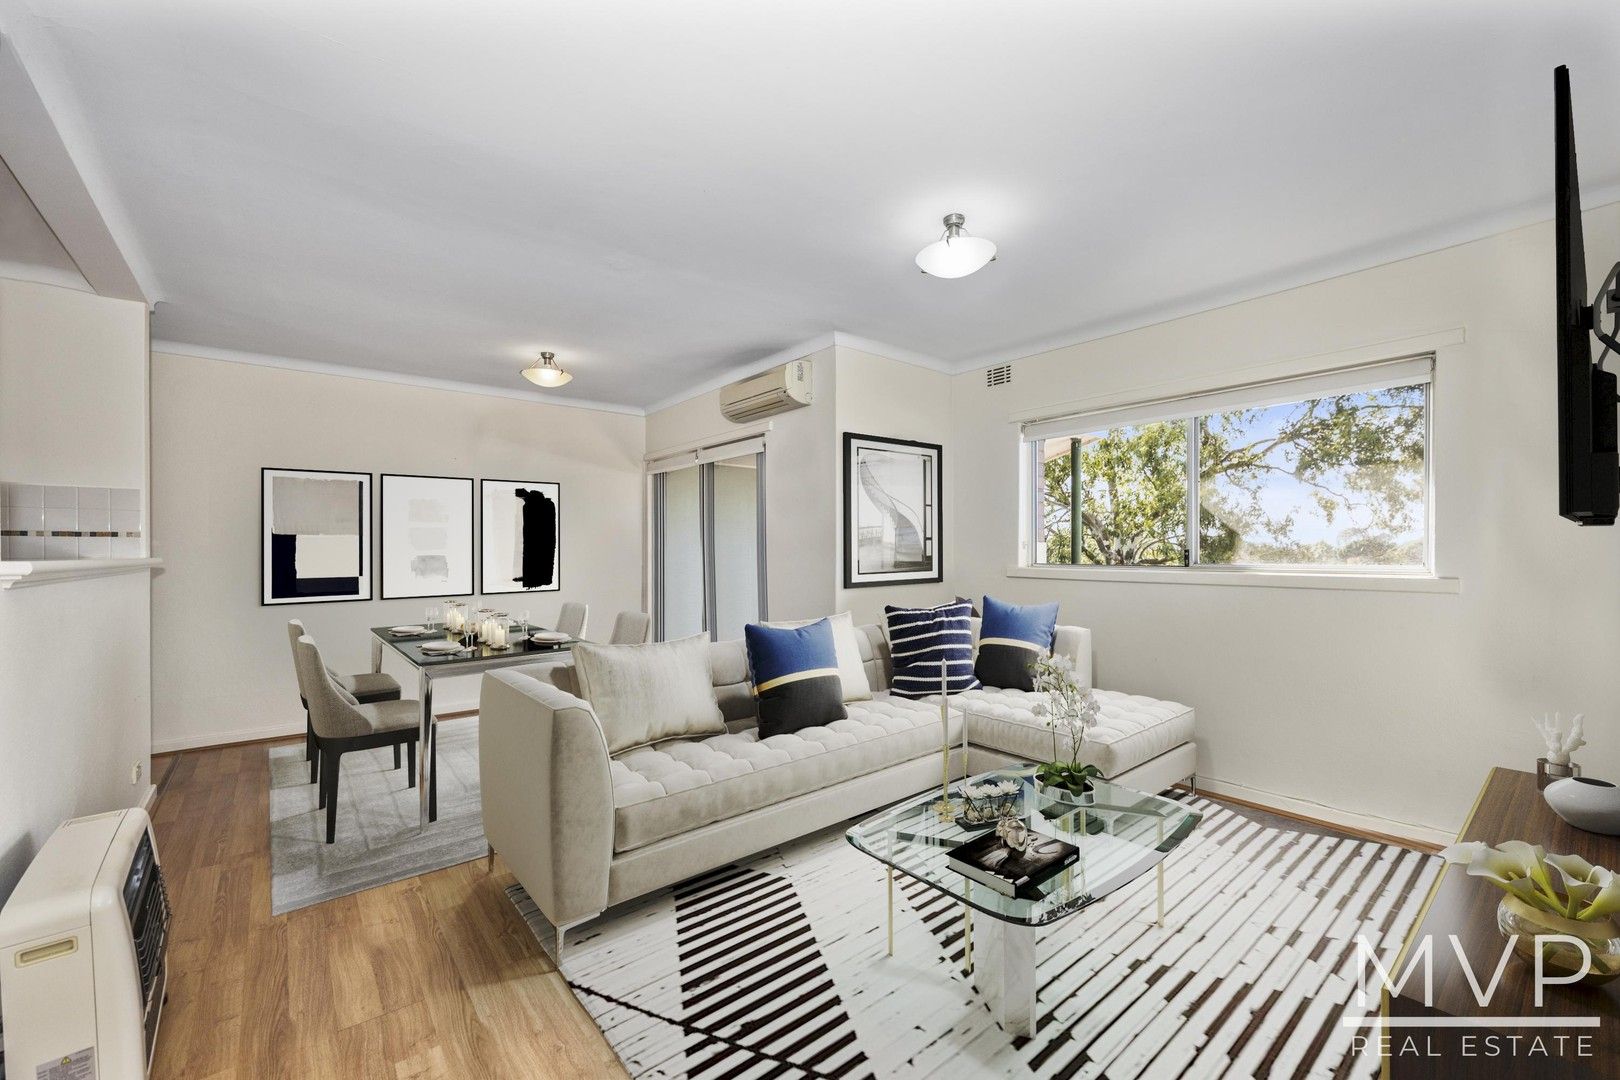 2 bedrooms Apartment / Unit / Flat in 12/21 Montague Way COOLBELLUP WA, 6163